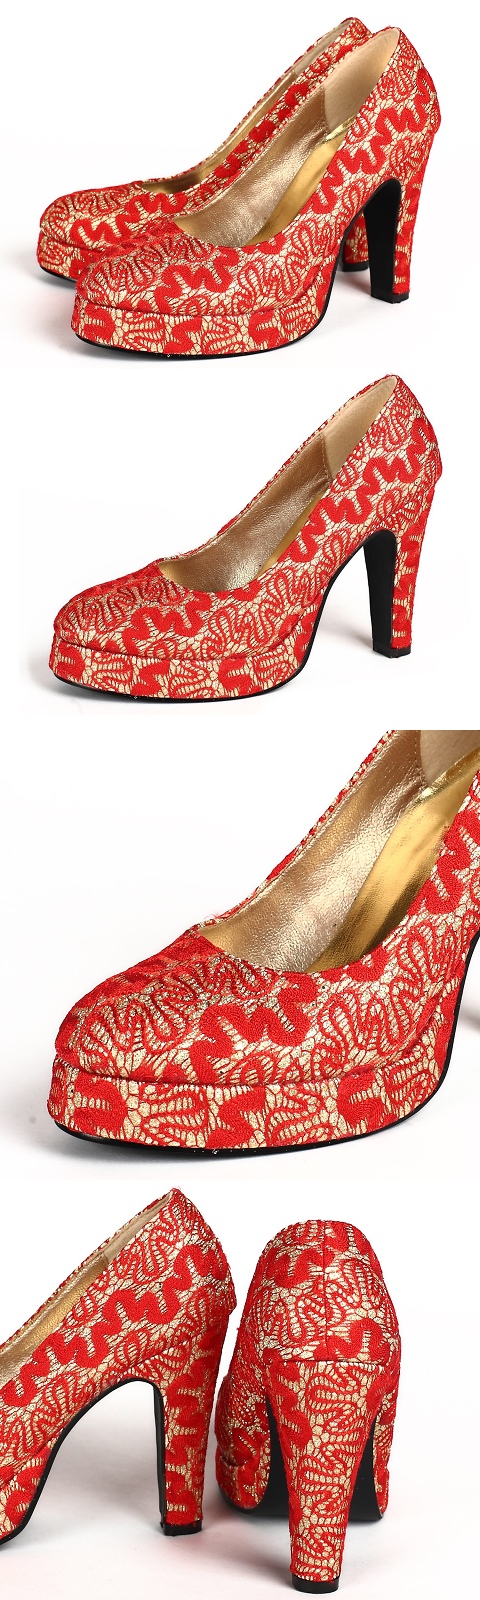 High Heel Lace Vamp Shoes